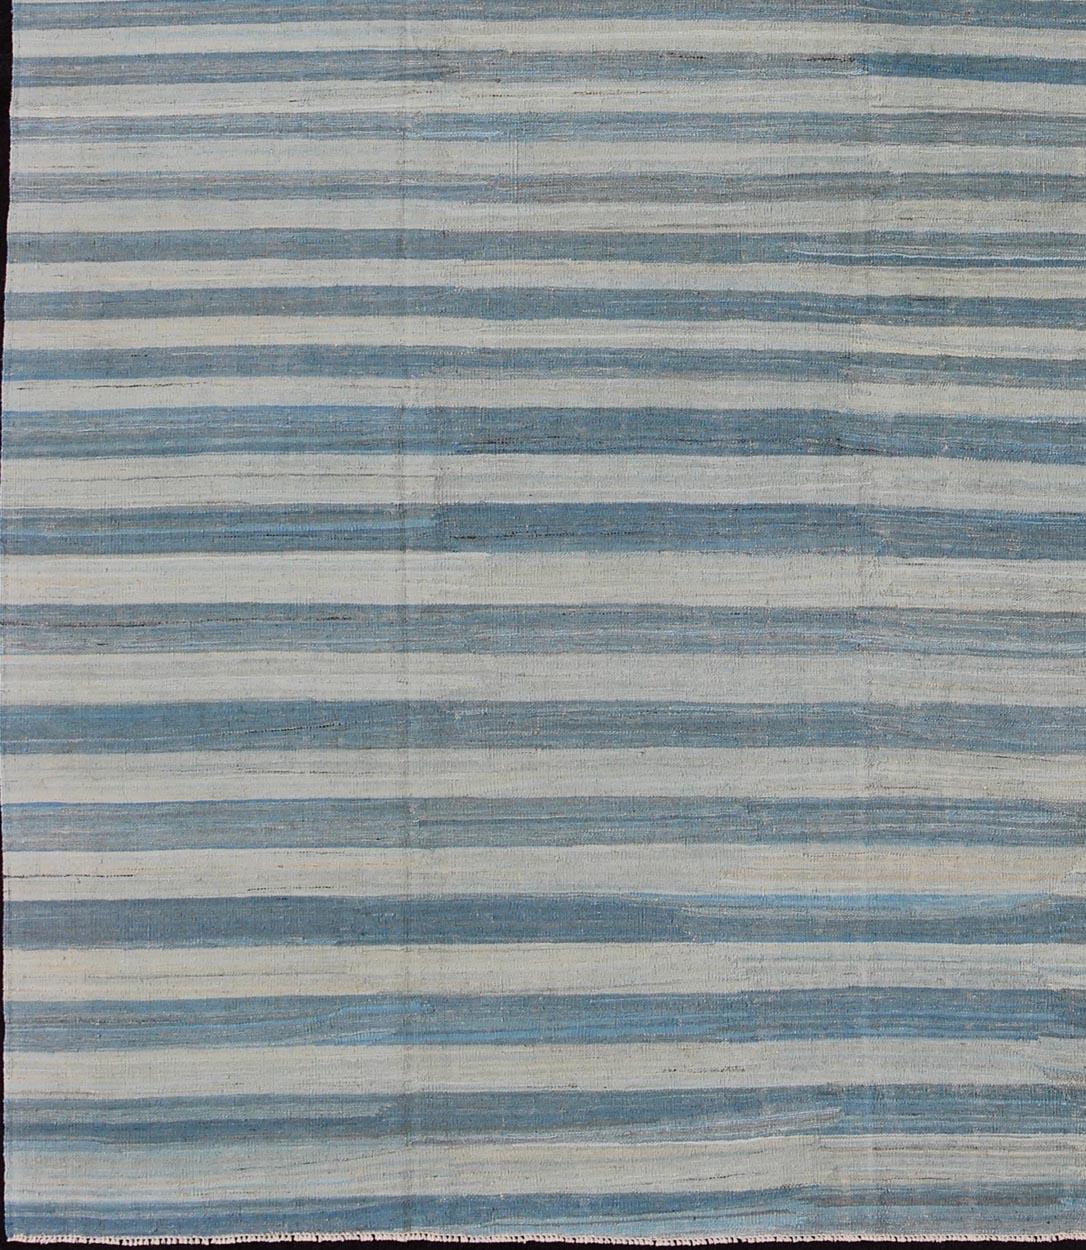 Flat-weave Kilim rug with stripes with modern design in shades of blue, taupe gray and ivory, rug afg-15288, country of origin / type: Afghanistan / Kilim

This playful piece features a Classic stripe design that evokes casual and easy vibes.